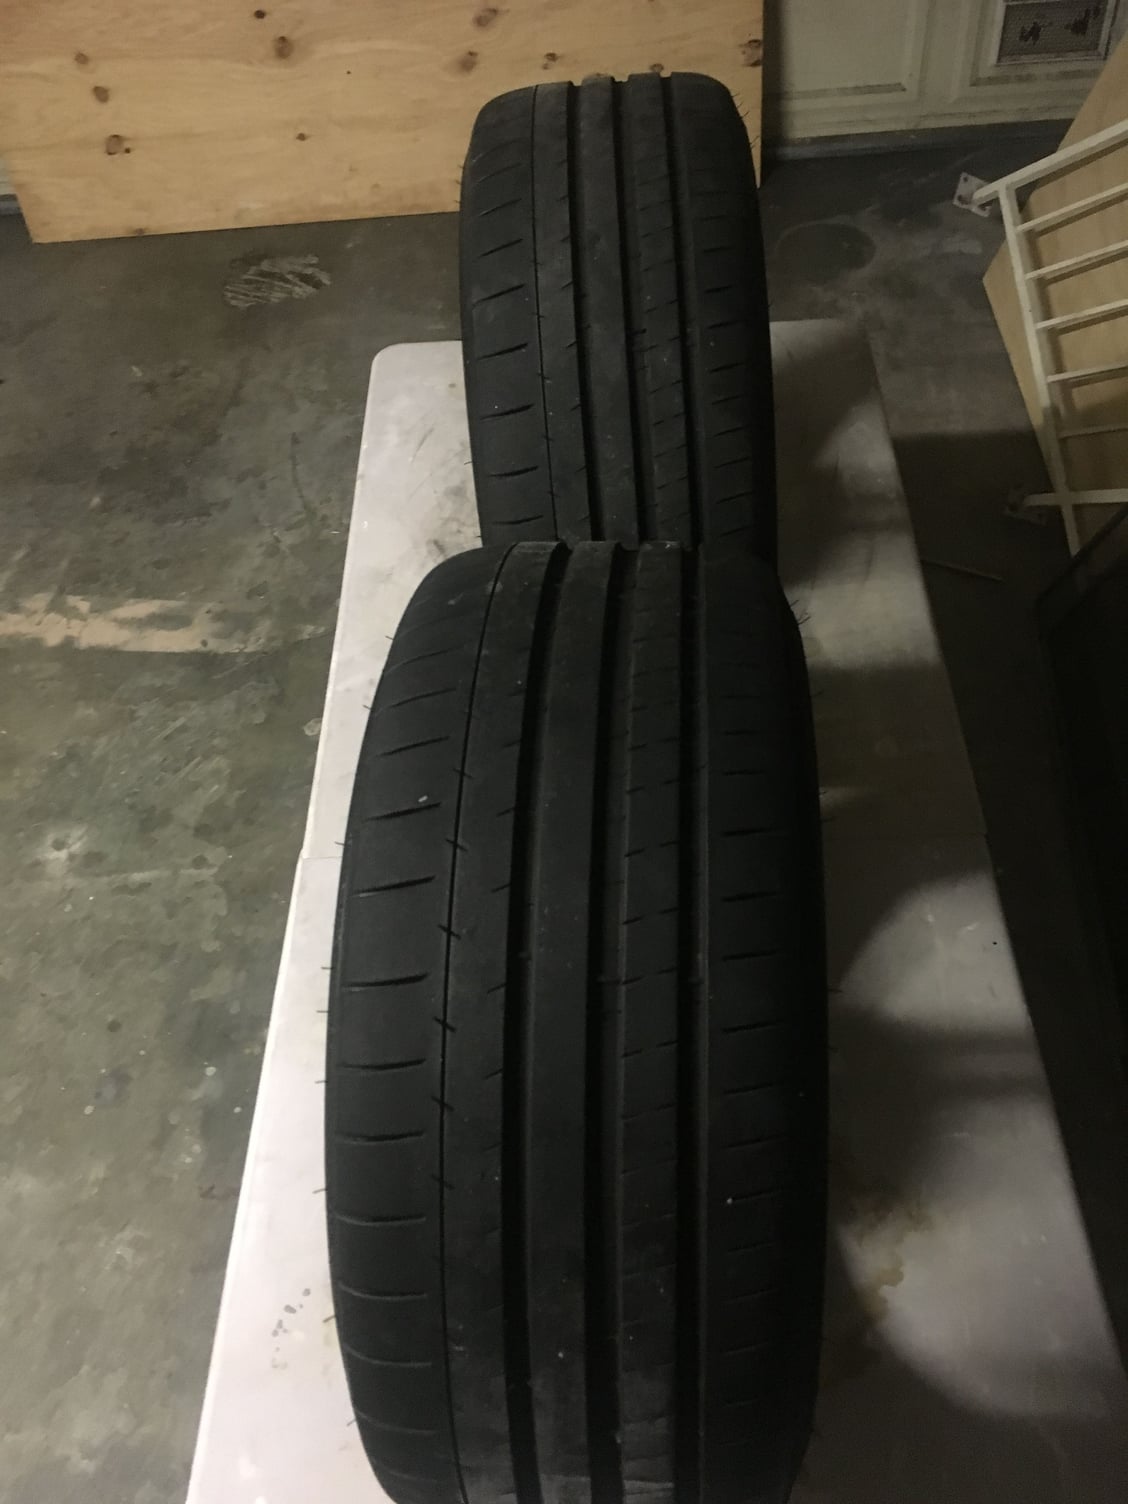 Wheels and Tires/Axles - HRE 547R 20" wheels and tires coming off of a E63 - Used - 2010 to 2016 Mercedes-Benz E63 AMG - Los Angeles, CA 91343, United States